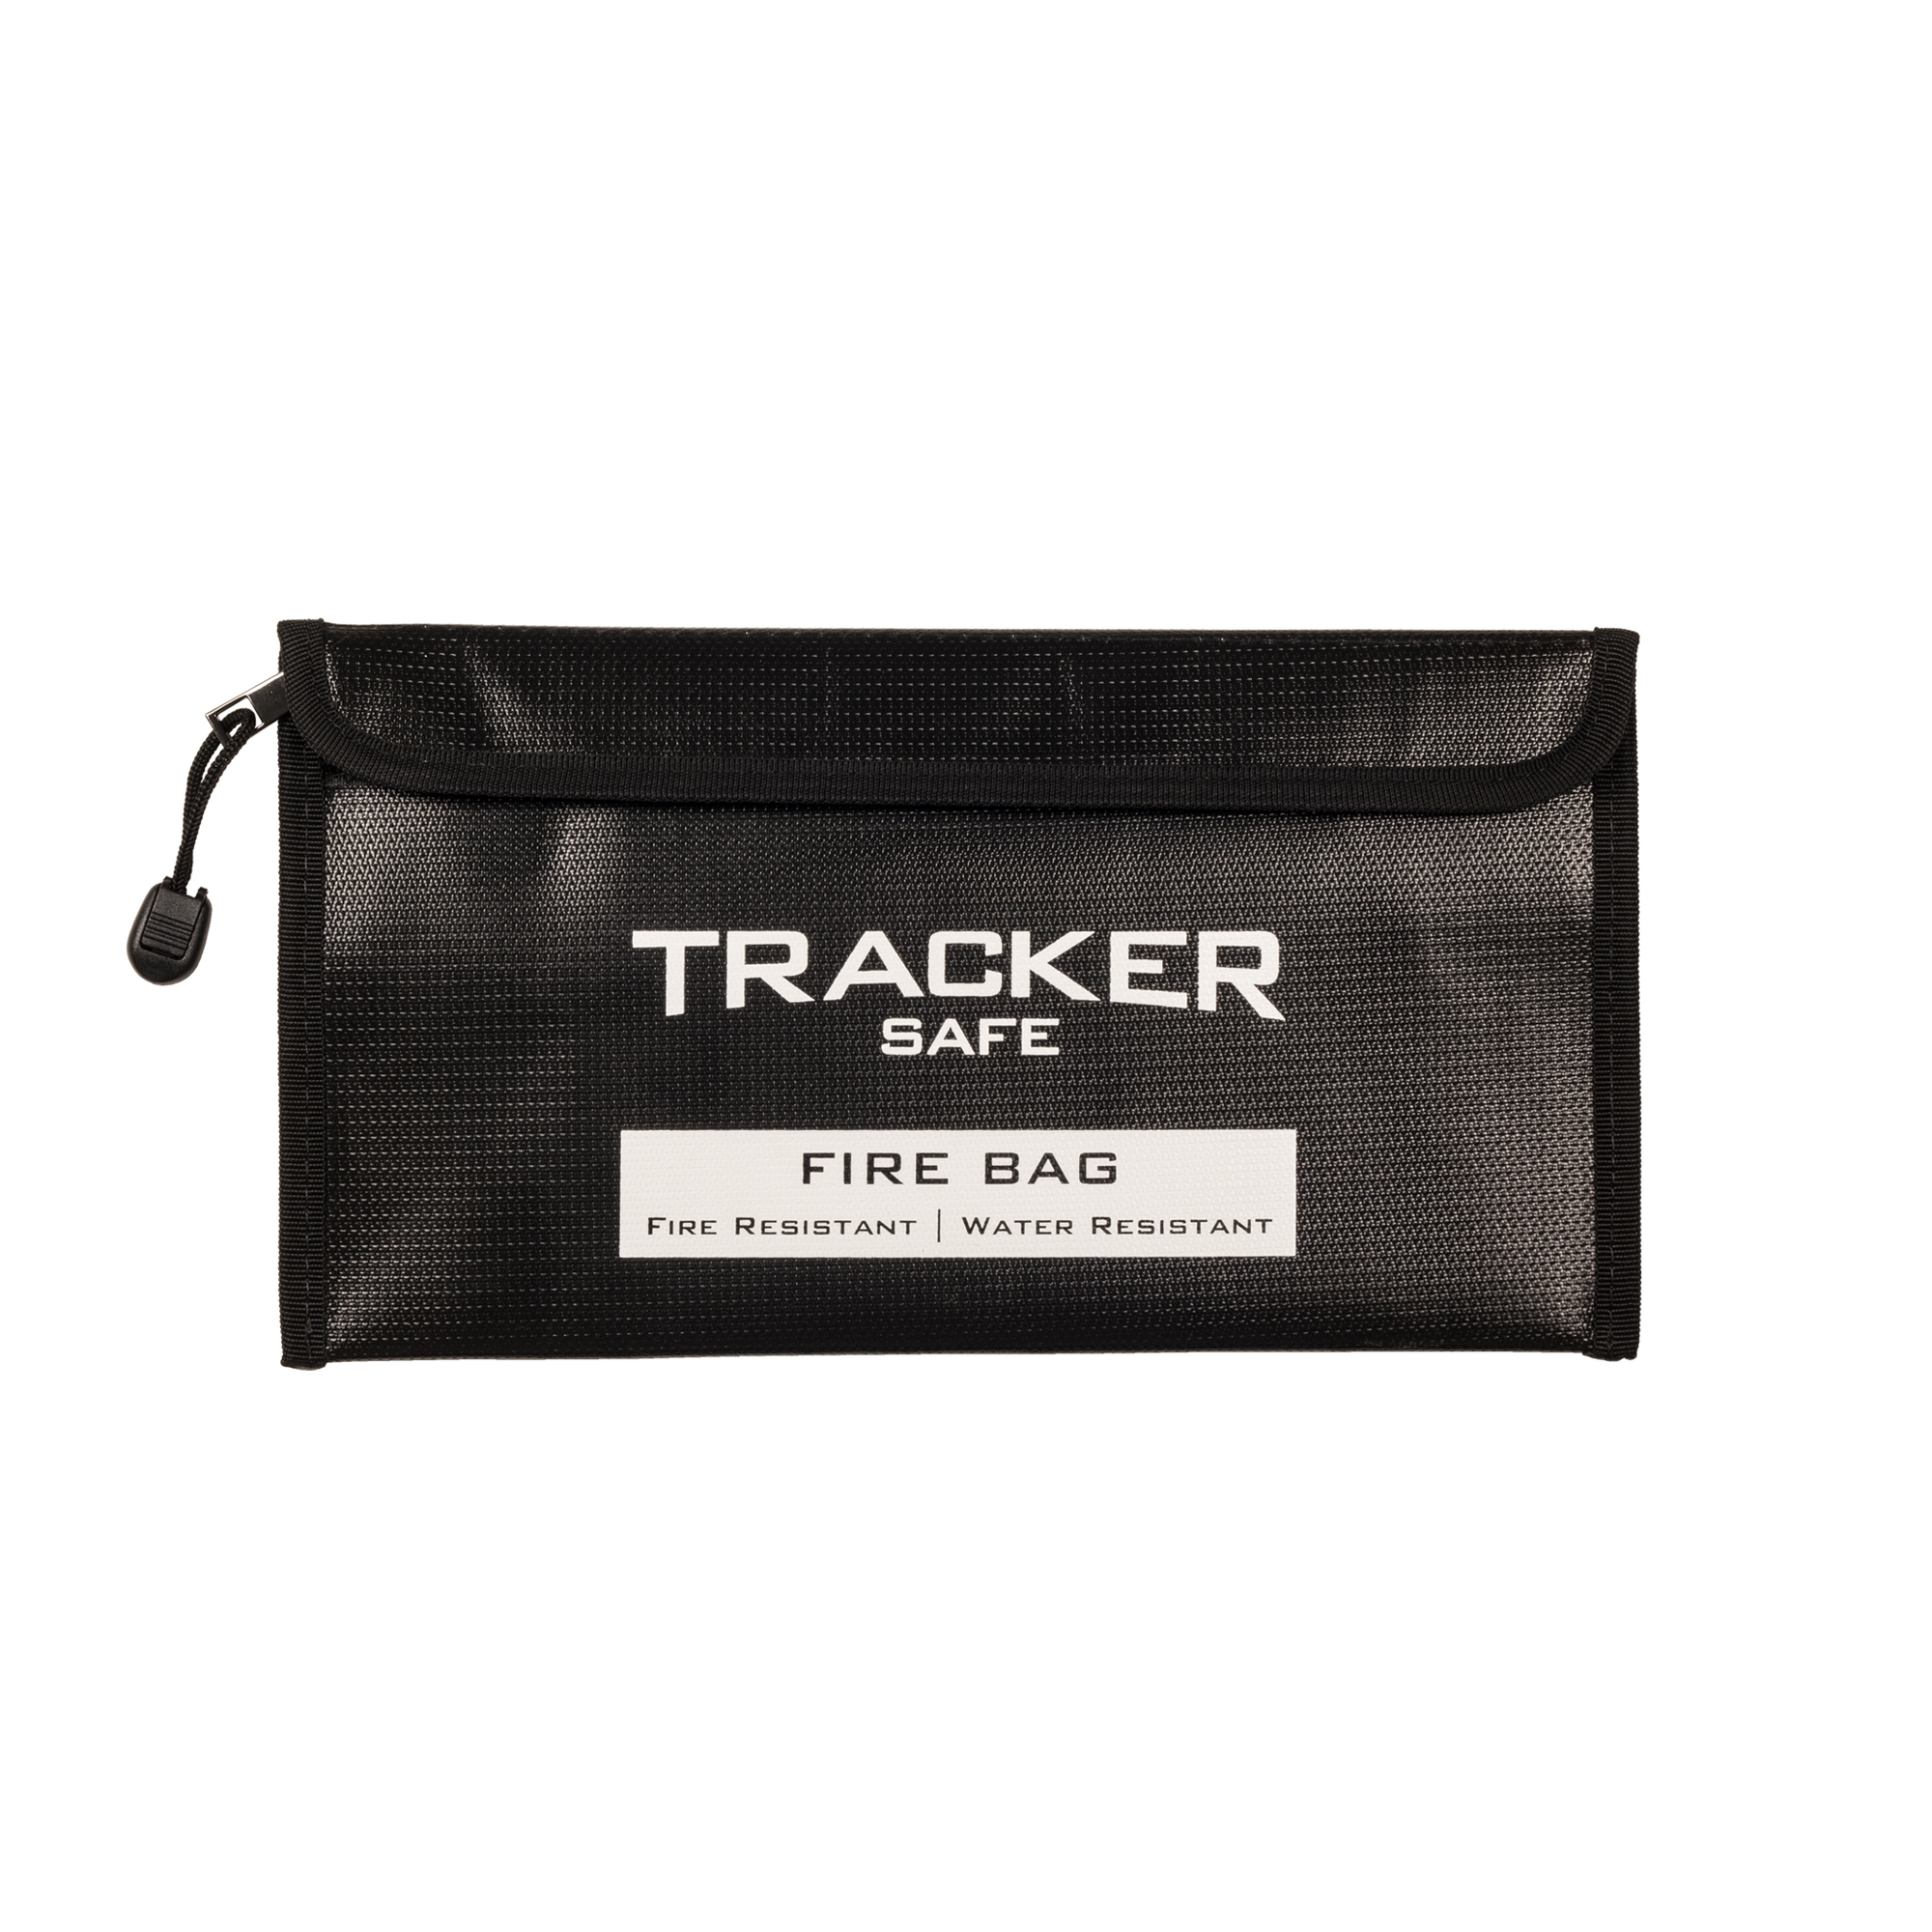 Tracker Safe, Fire/Water Resistant Bag - Small, Lock Type None, Model FB0611